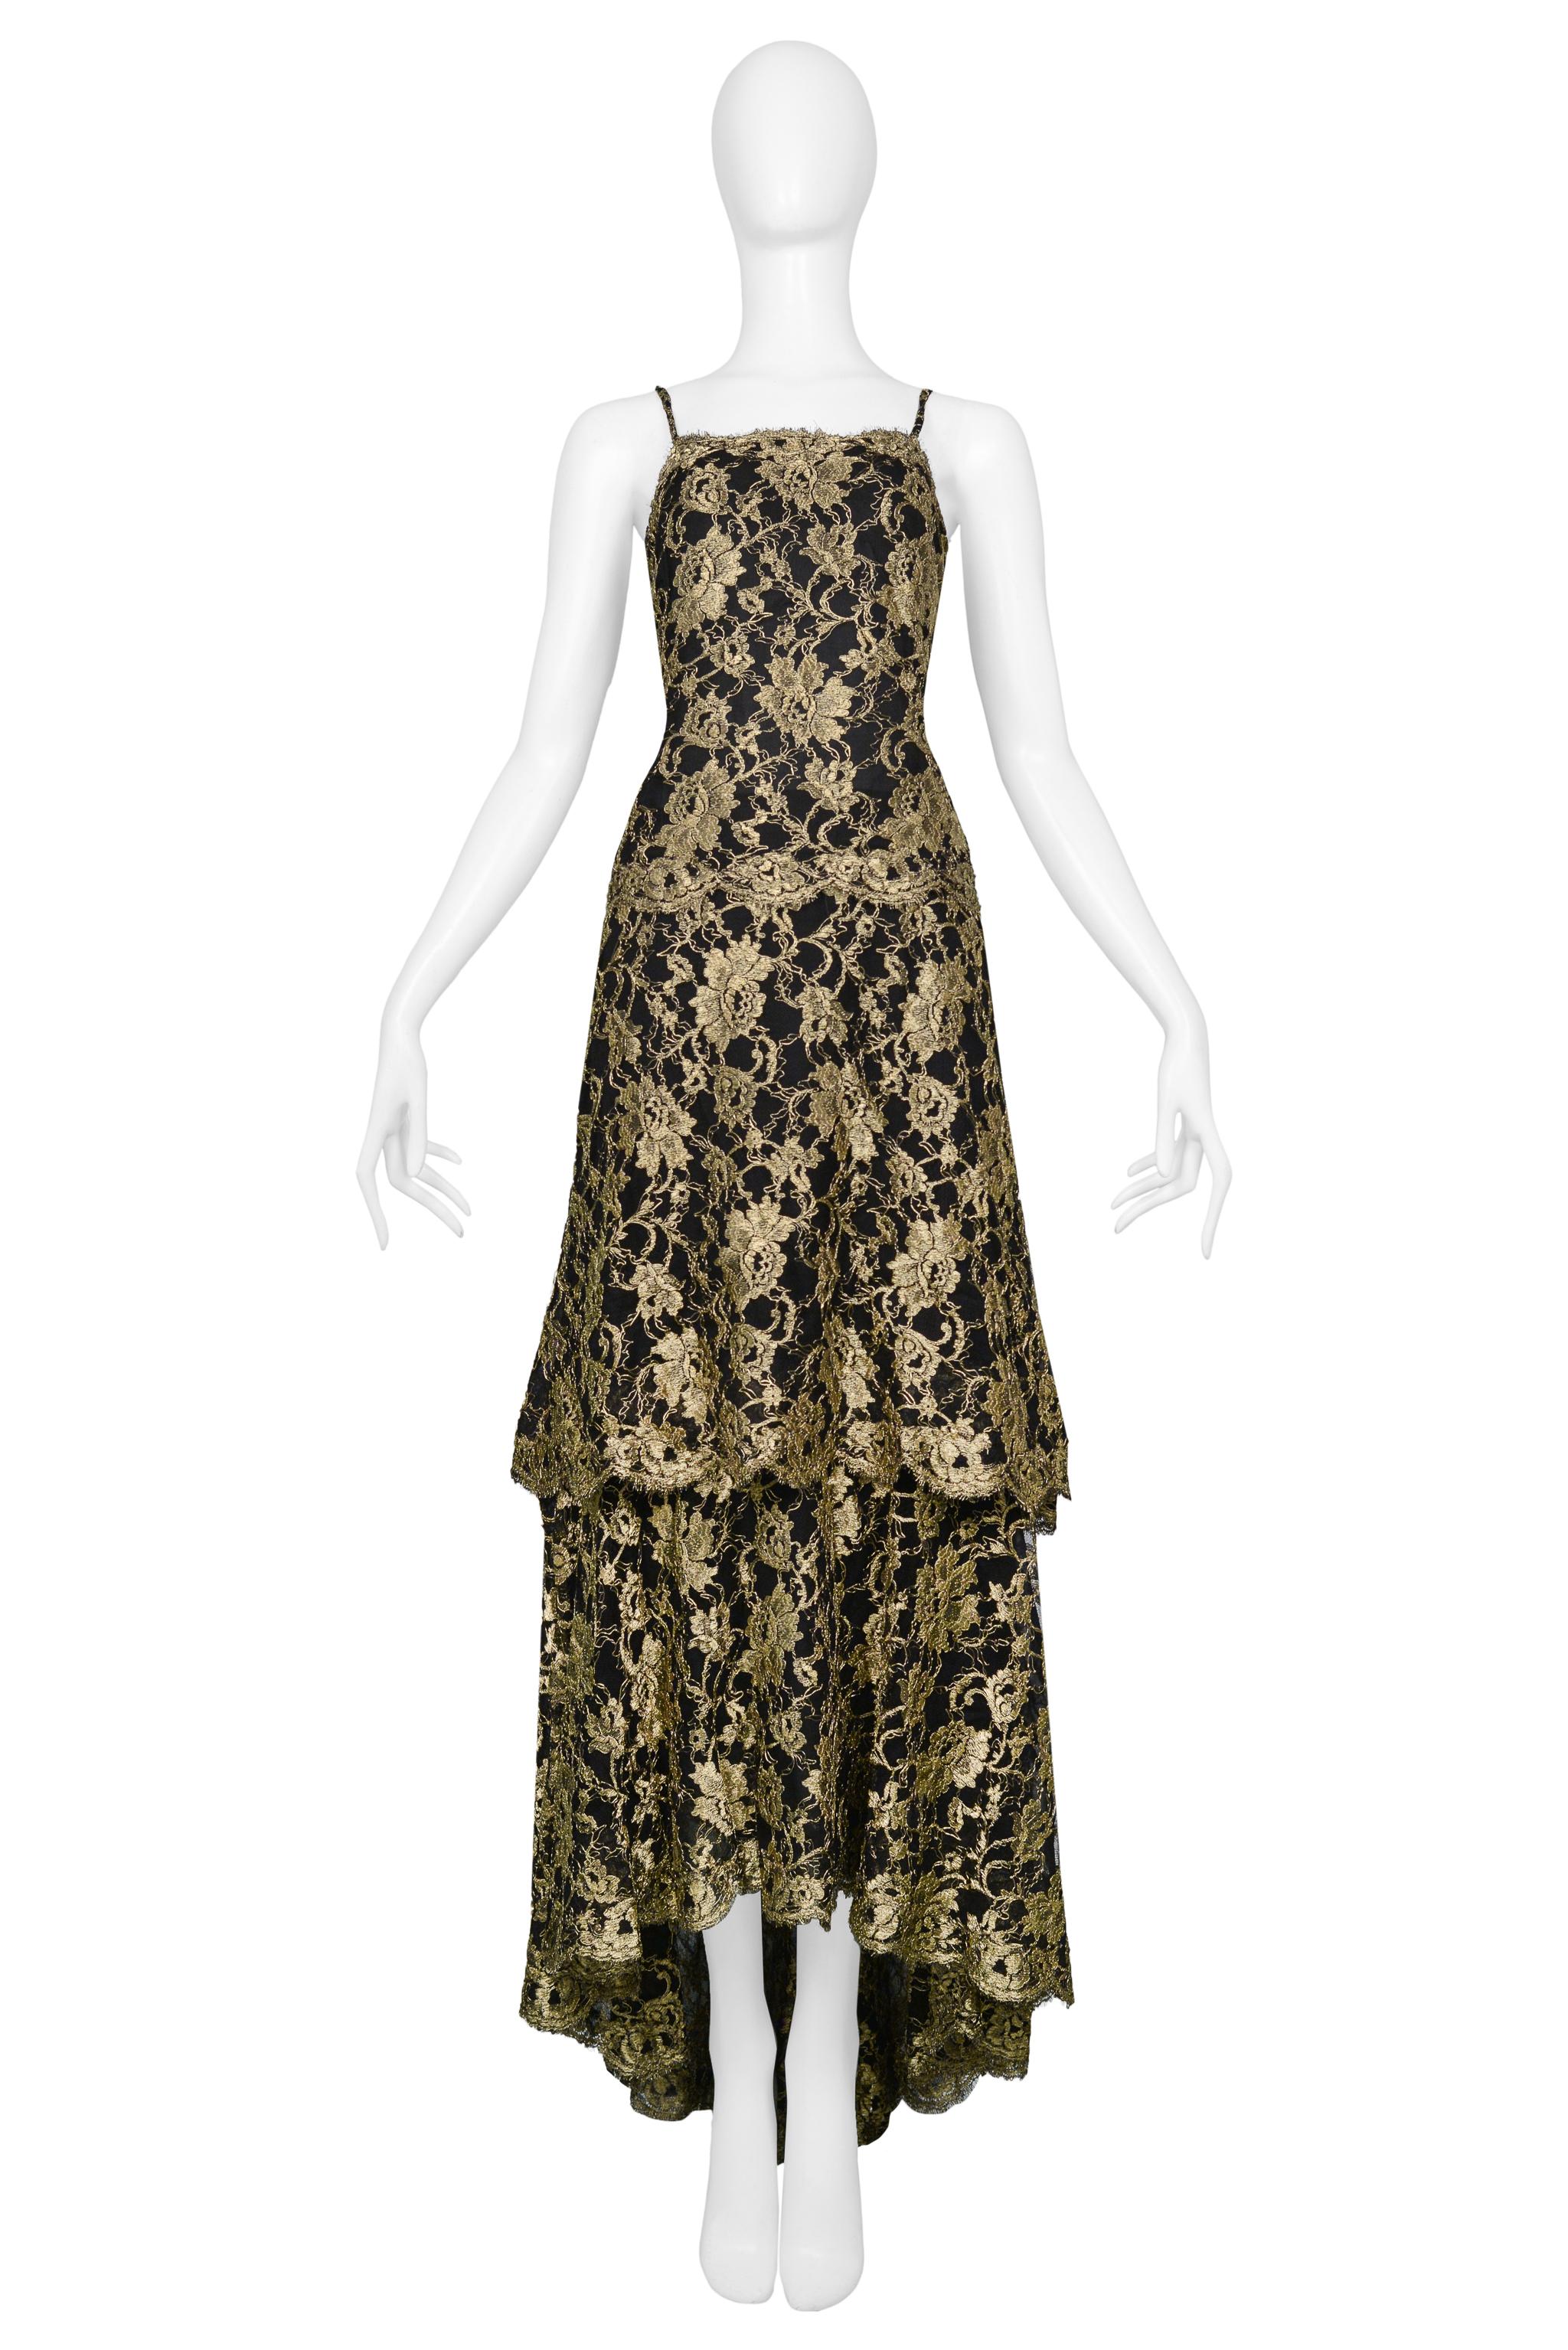 Chanel By Karl Lagerfeld Gold & Black Lace Evening Gown 1986 In Excellent Condition In Los Angeles, CA